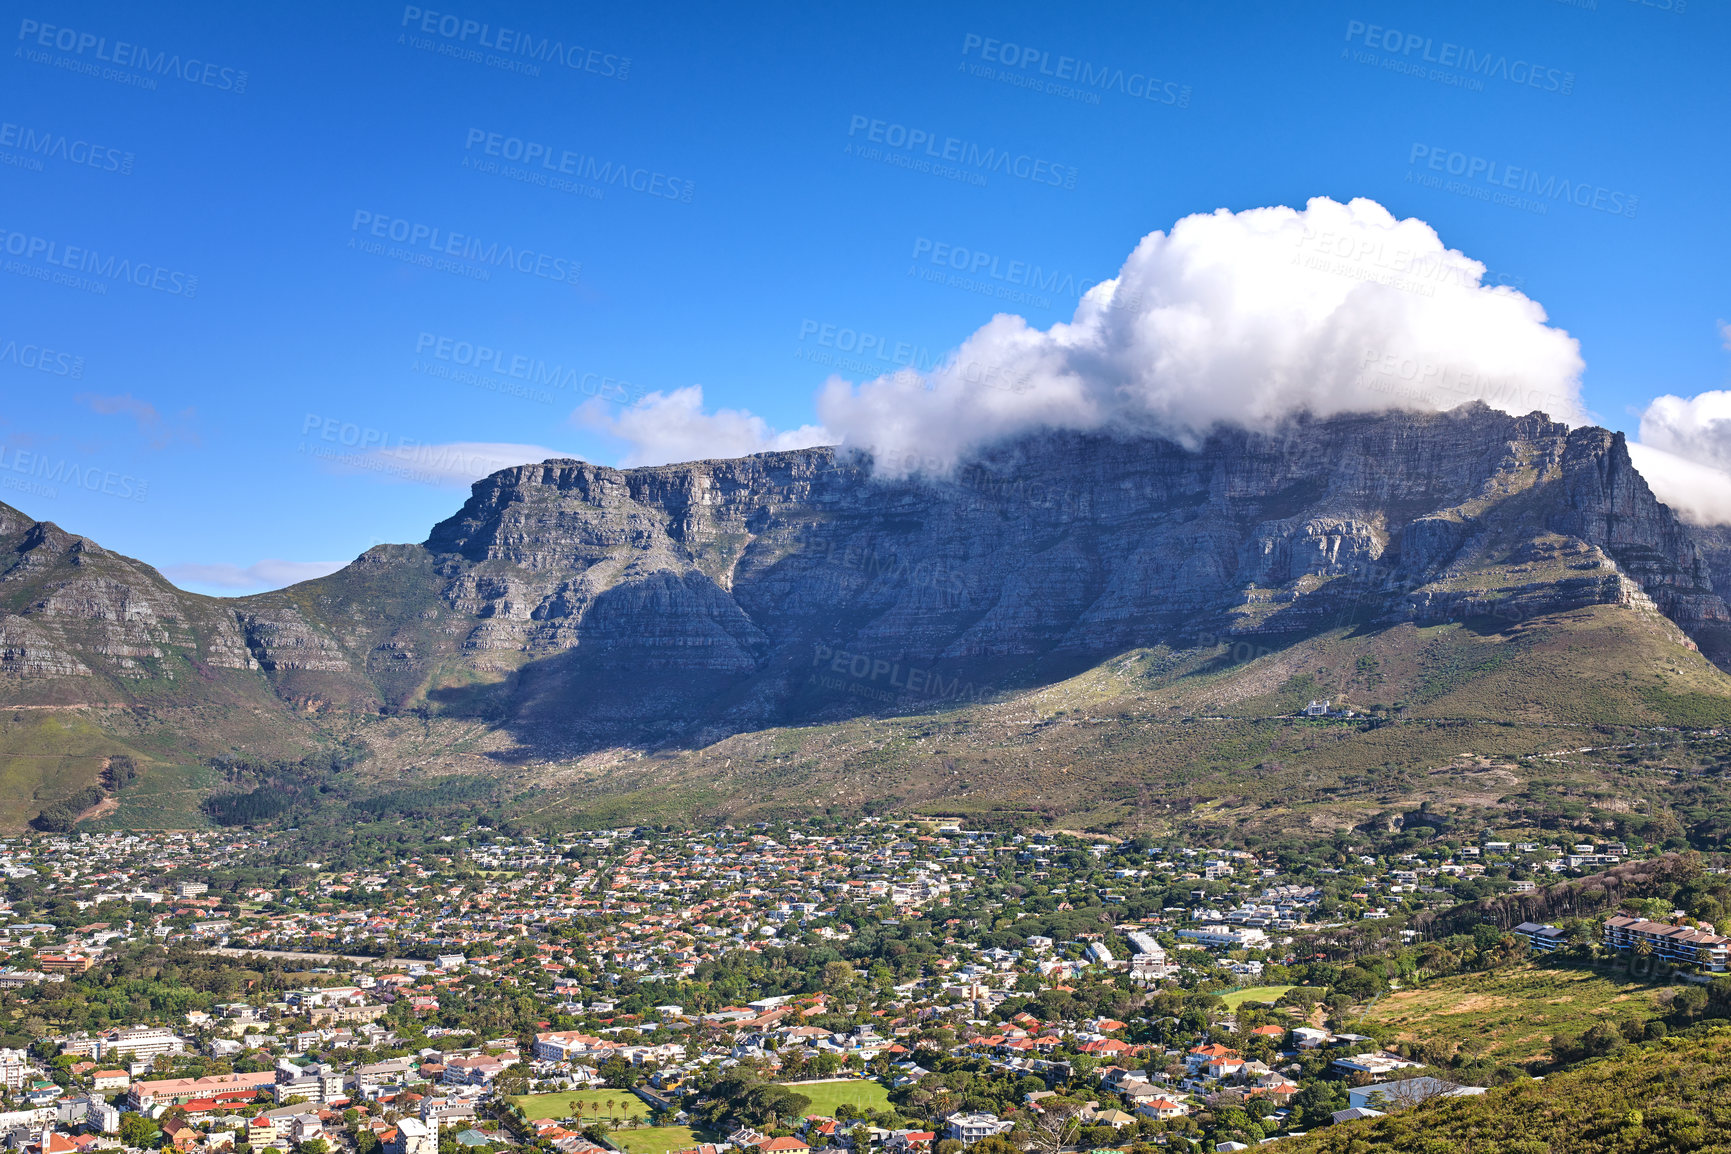 Buy stock photo Cumulus clouds forming over Lions Head mountain against a blue sky with copyspace. Panoramic landscape of green mountains with vegetation surrounding an urban city in Cape Town, South Africa